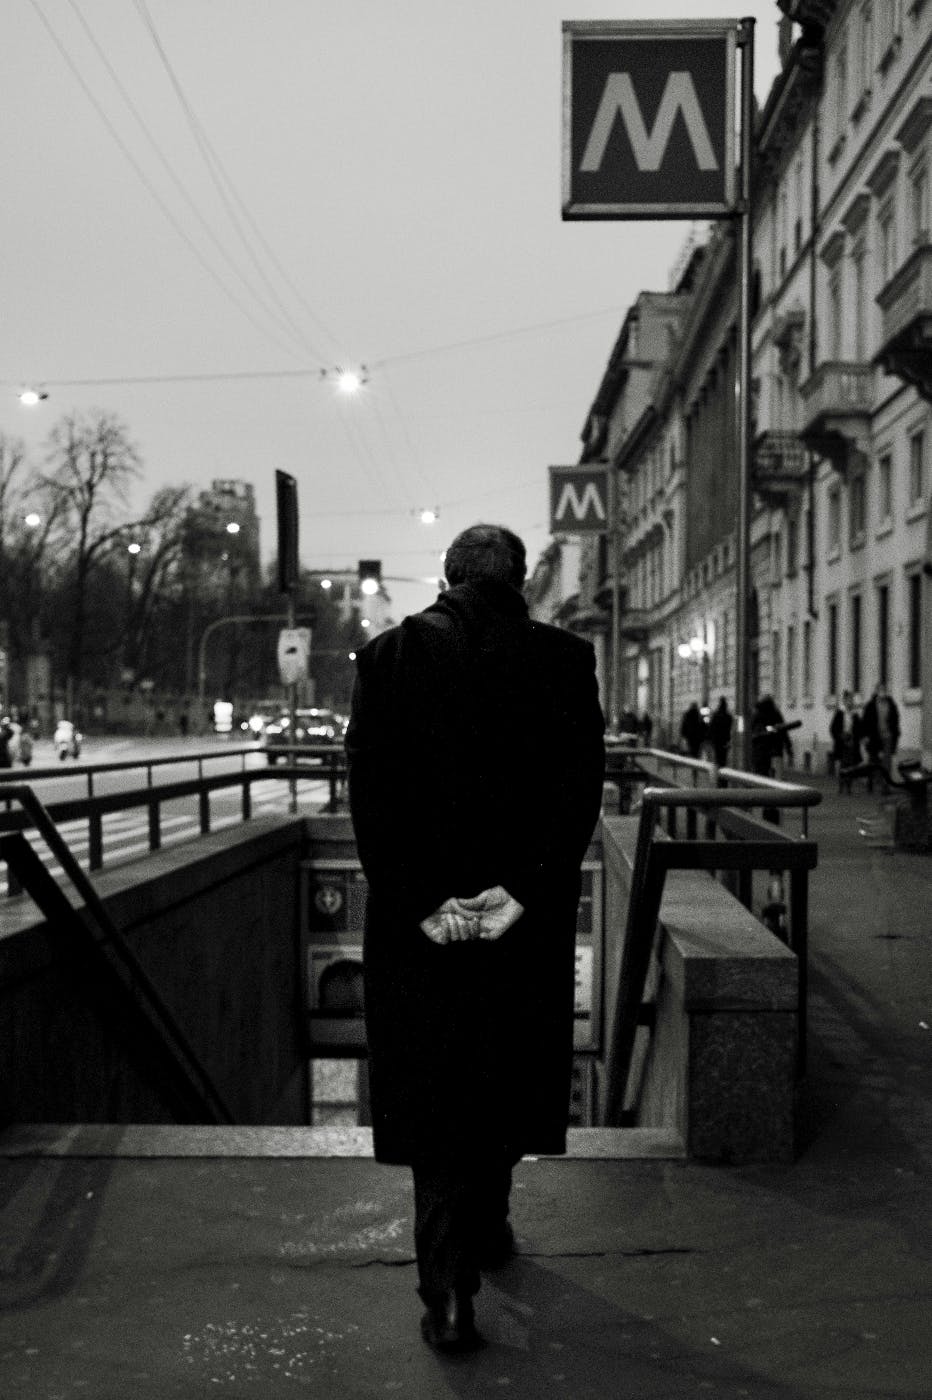 A black and white image of a man with hands behind his back entering a metro station